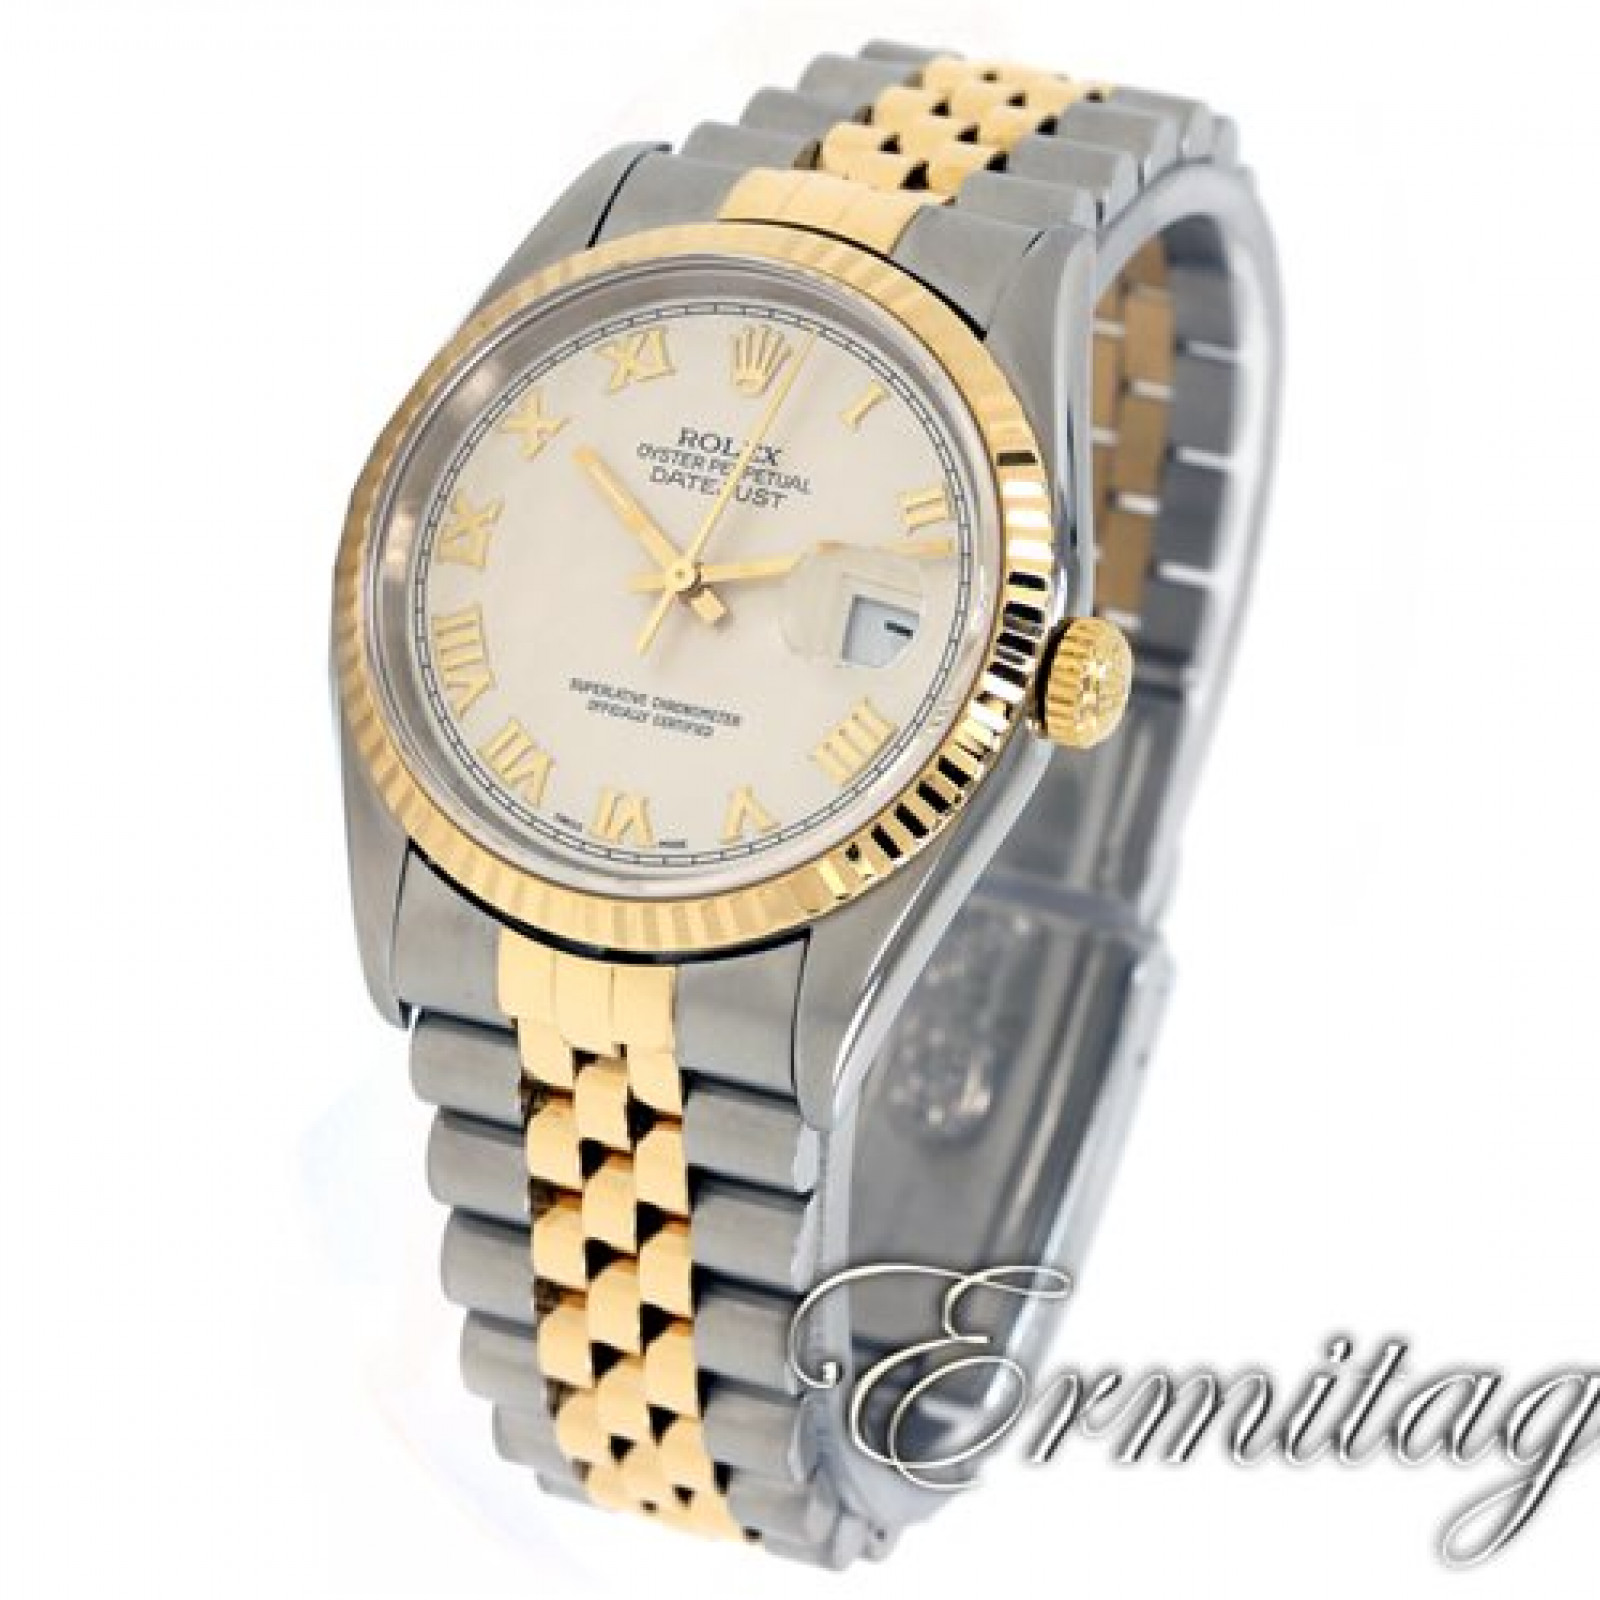 Rolex Datejust Ref 16233 Year 1998 with Pyramid Dial and Gold Roman Markers.